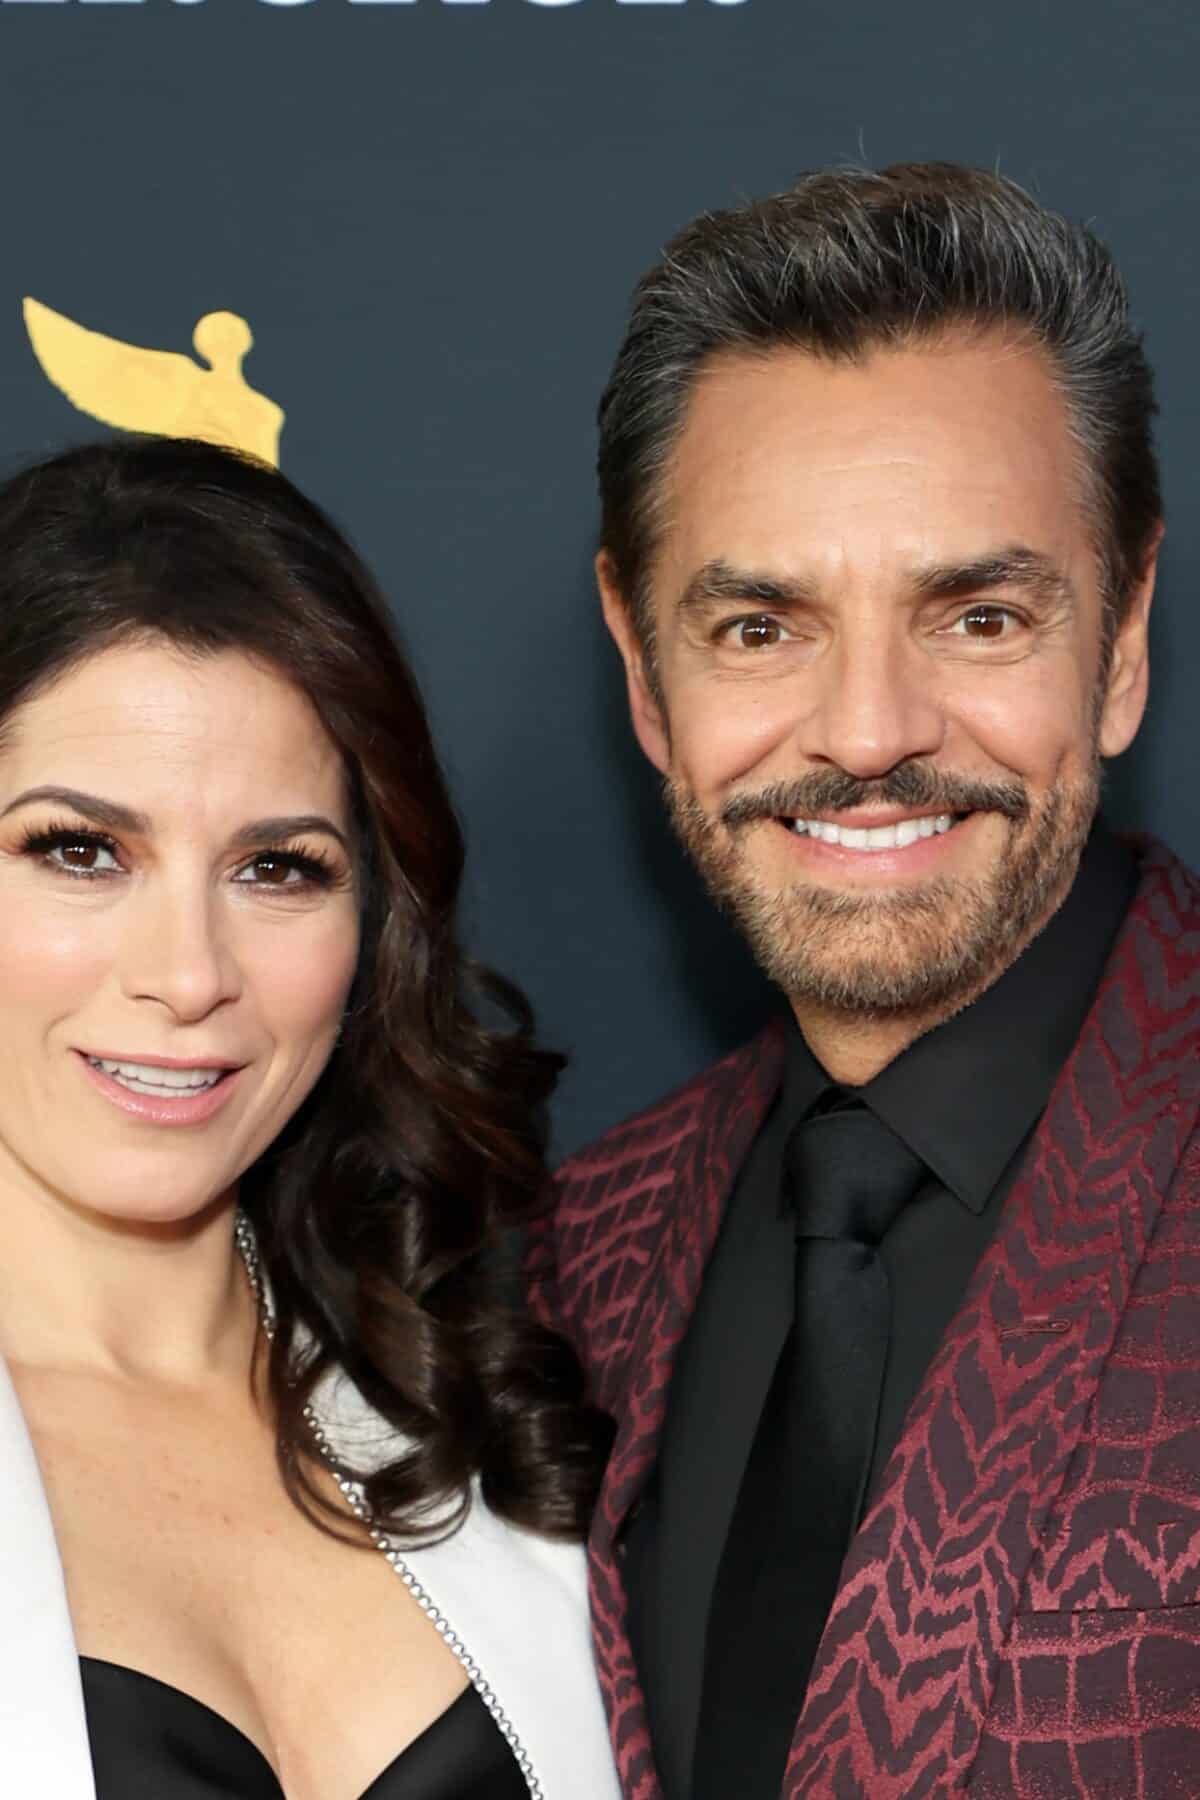 LOS ANGELES, CALIFORNIA - FEBRUARY 28: (L-R) Alessandra Rosaldo and Eugenio Derbez attend the 5th Annual HCA Film Awards at Avalon Hollywood & Bardot on February 28, 2022 in Los Angeles, California. (Photo by Amy Sussman/WireImage)